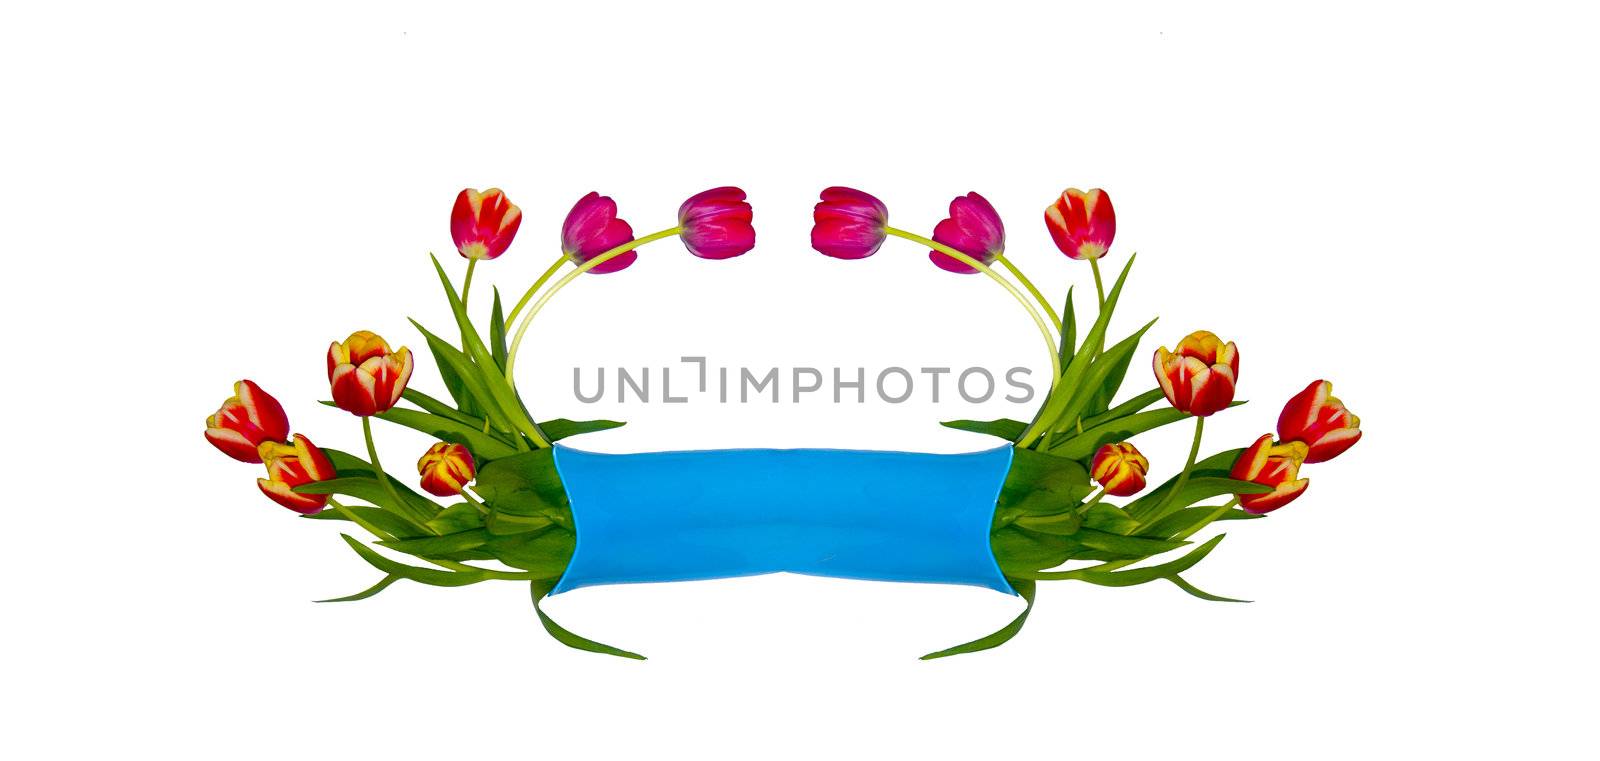 the Image of a vignette from tulips on a white background